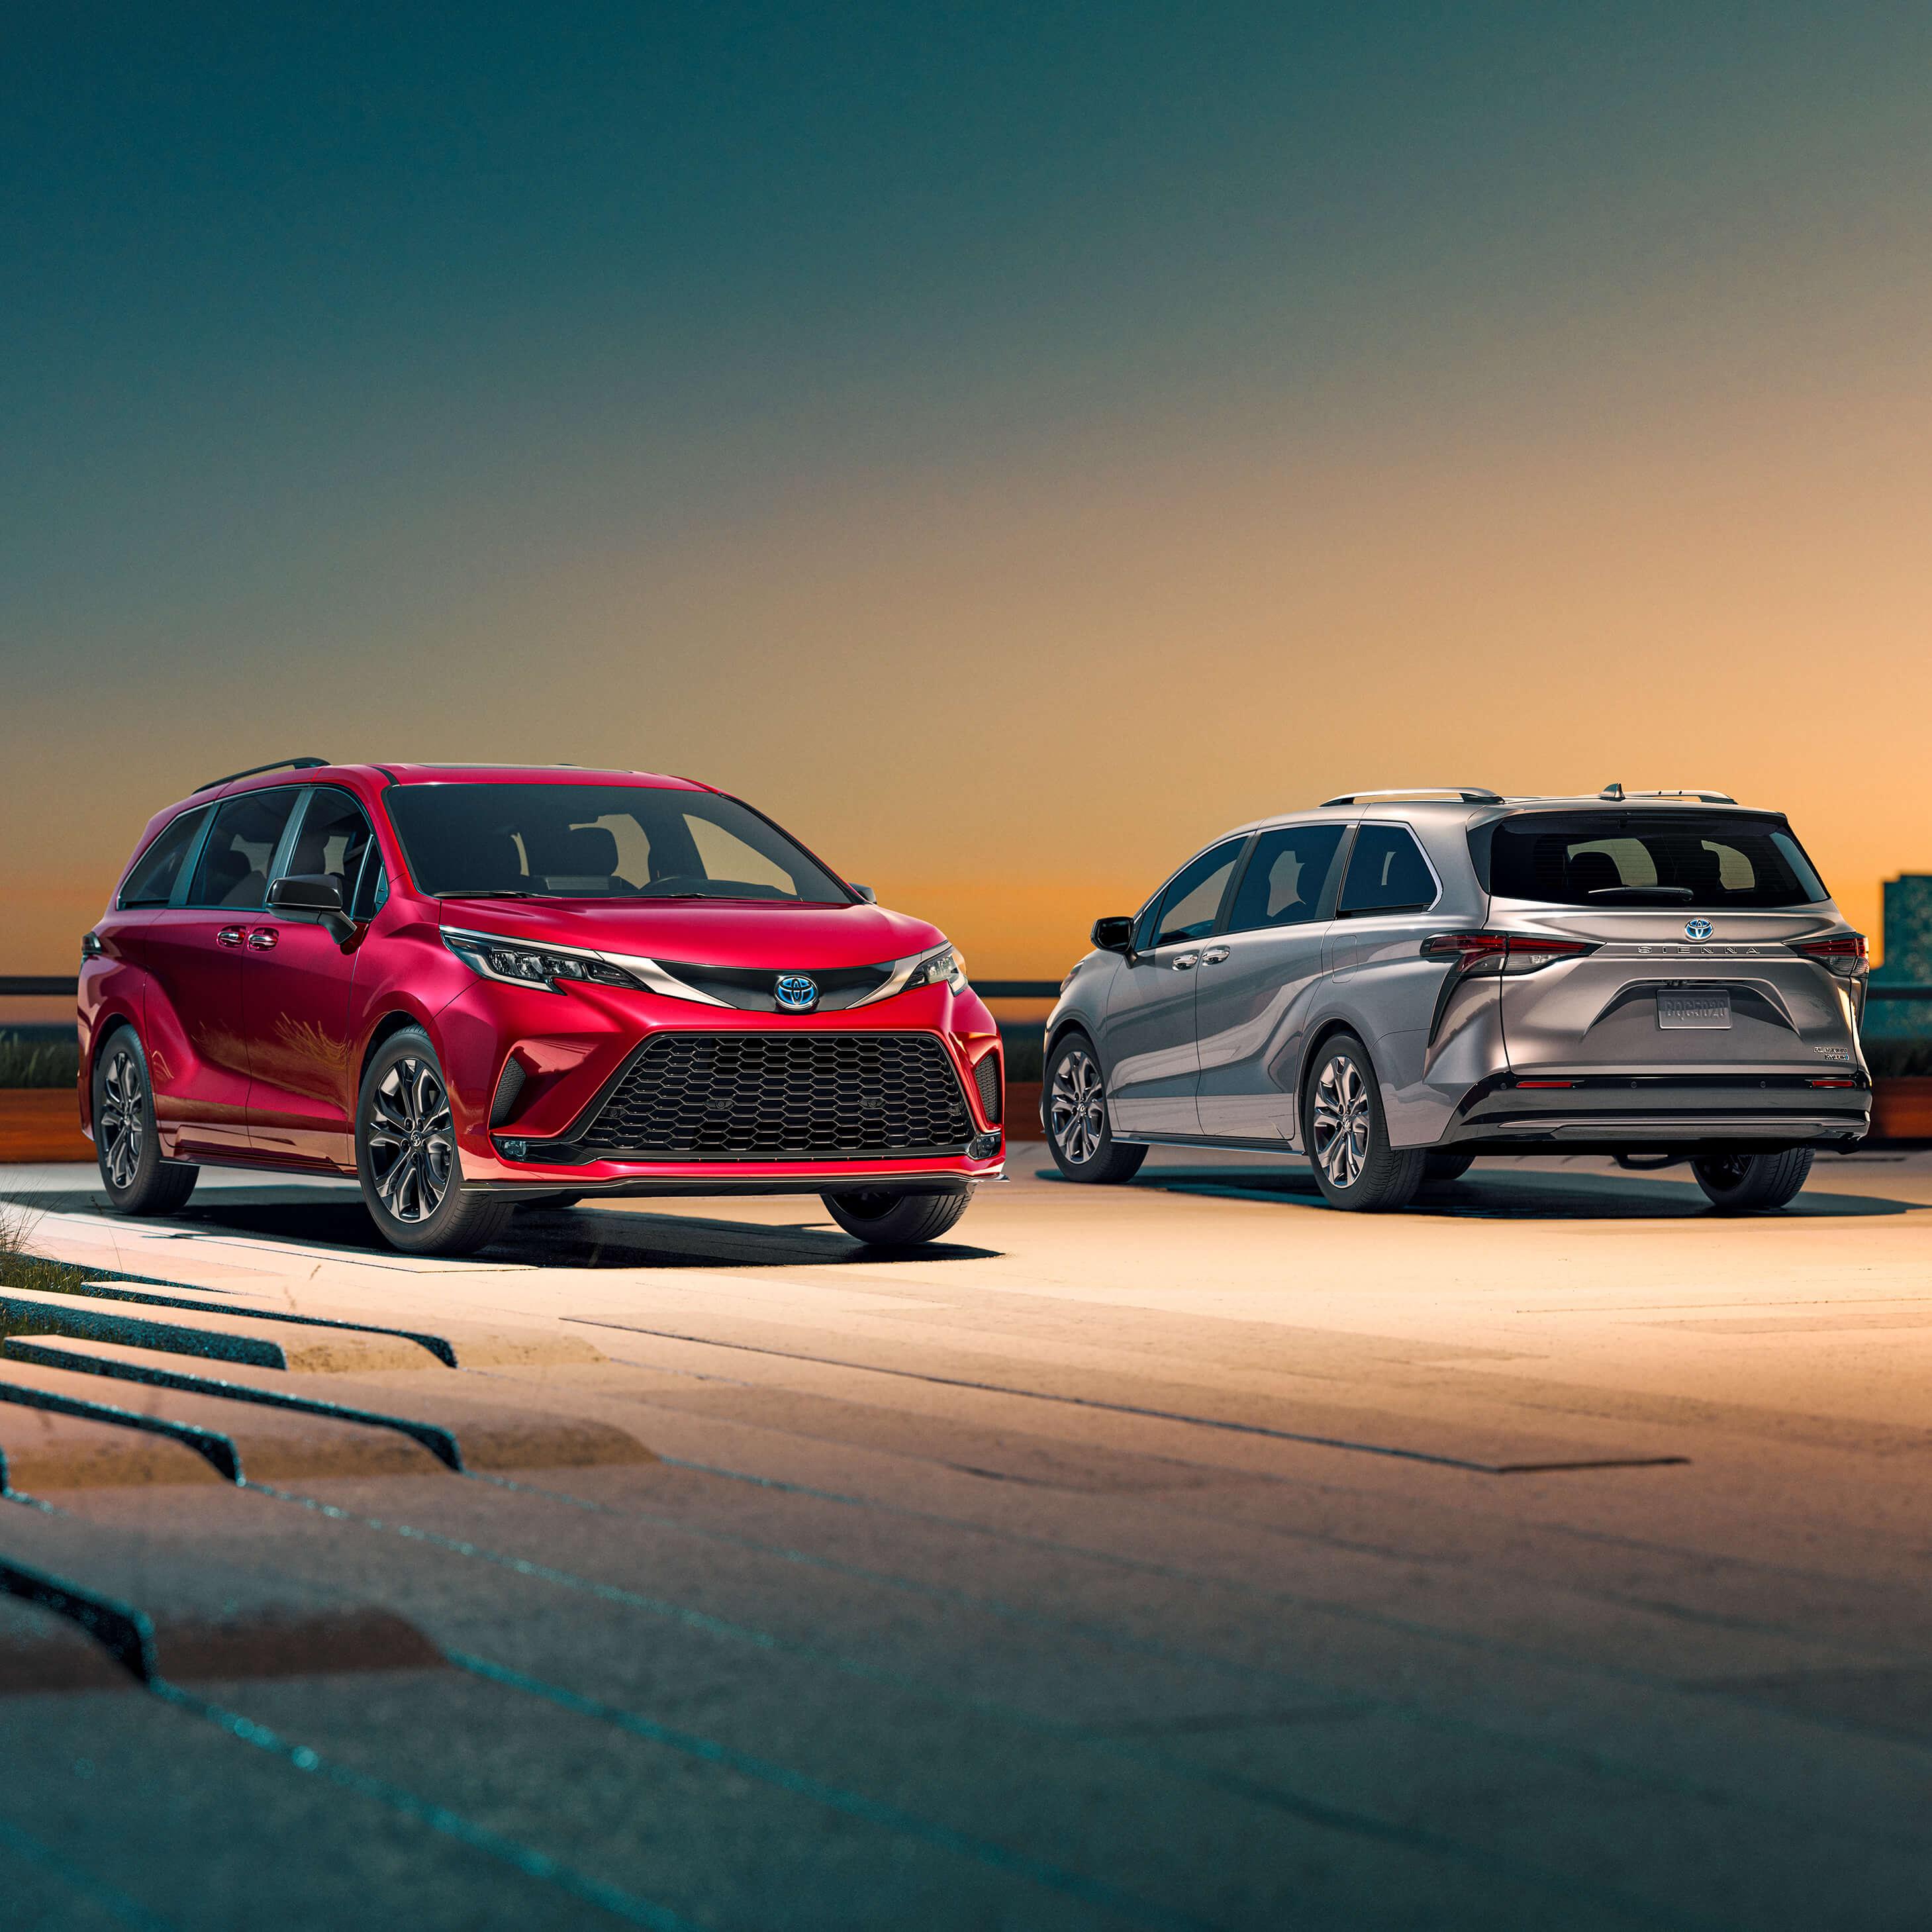 w Toyota Sienna minivans parked on a rooftop deck at sunset